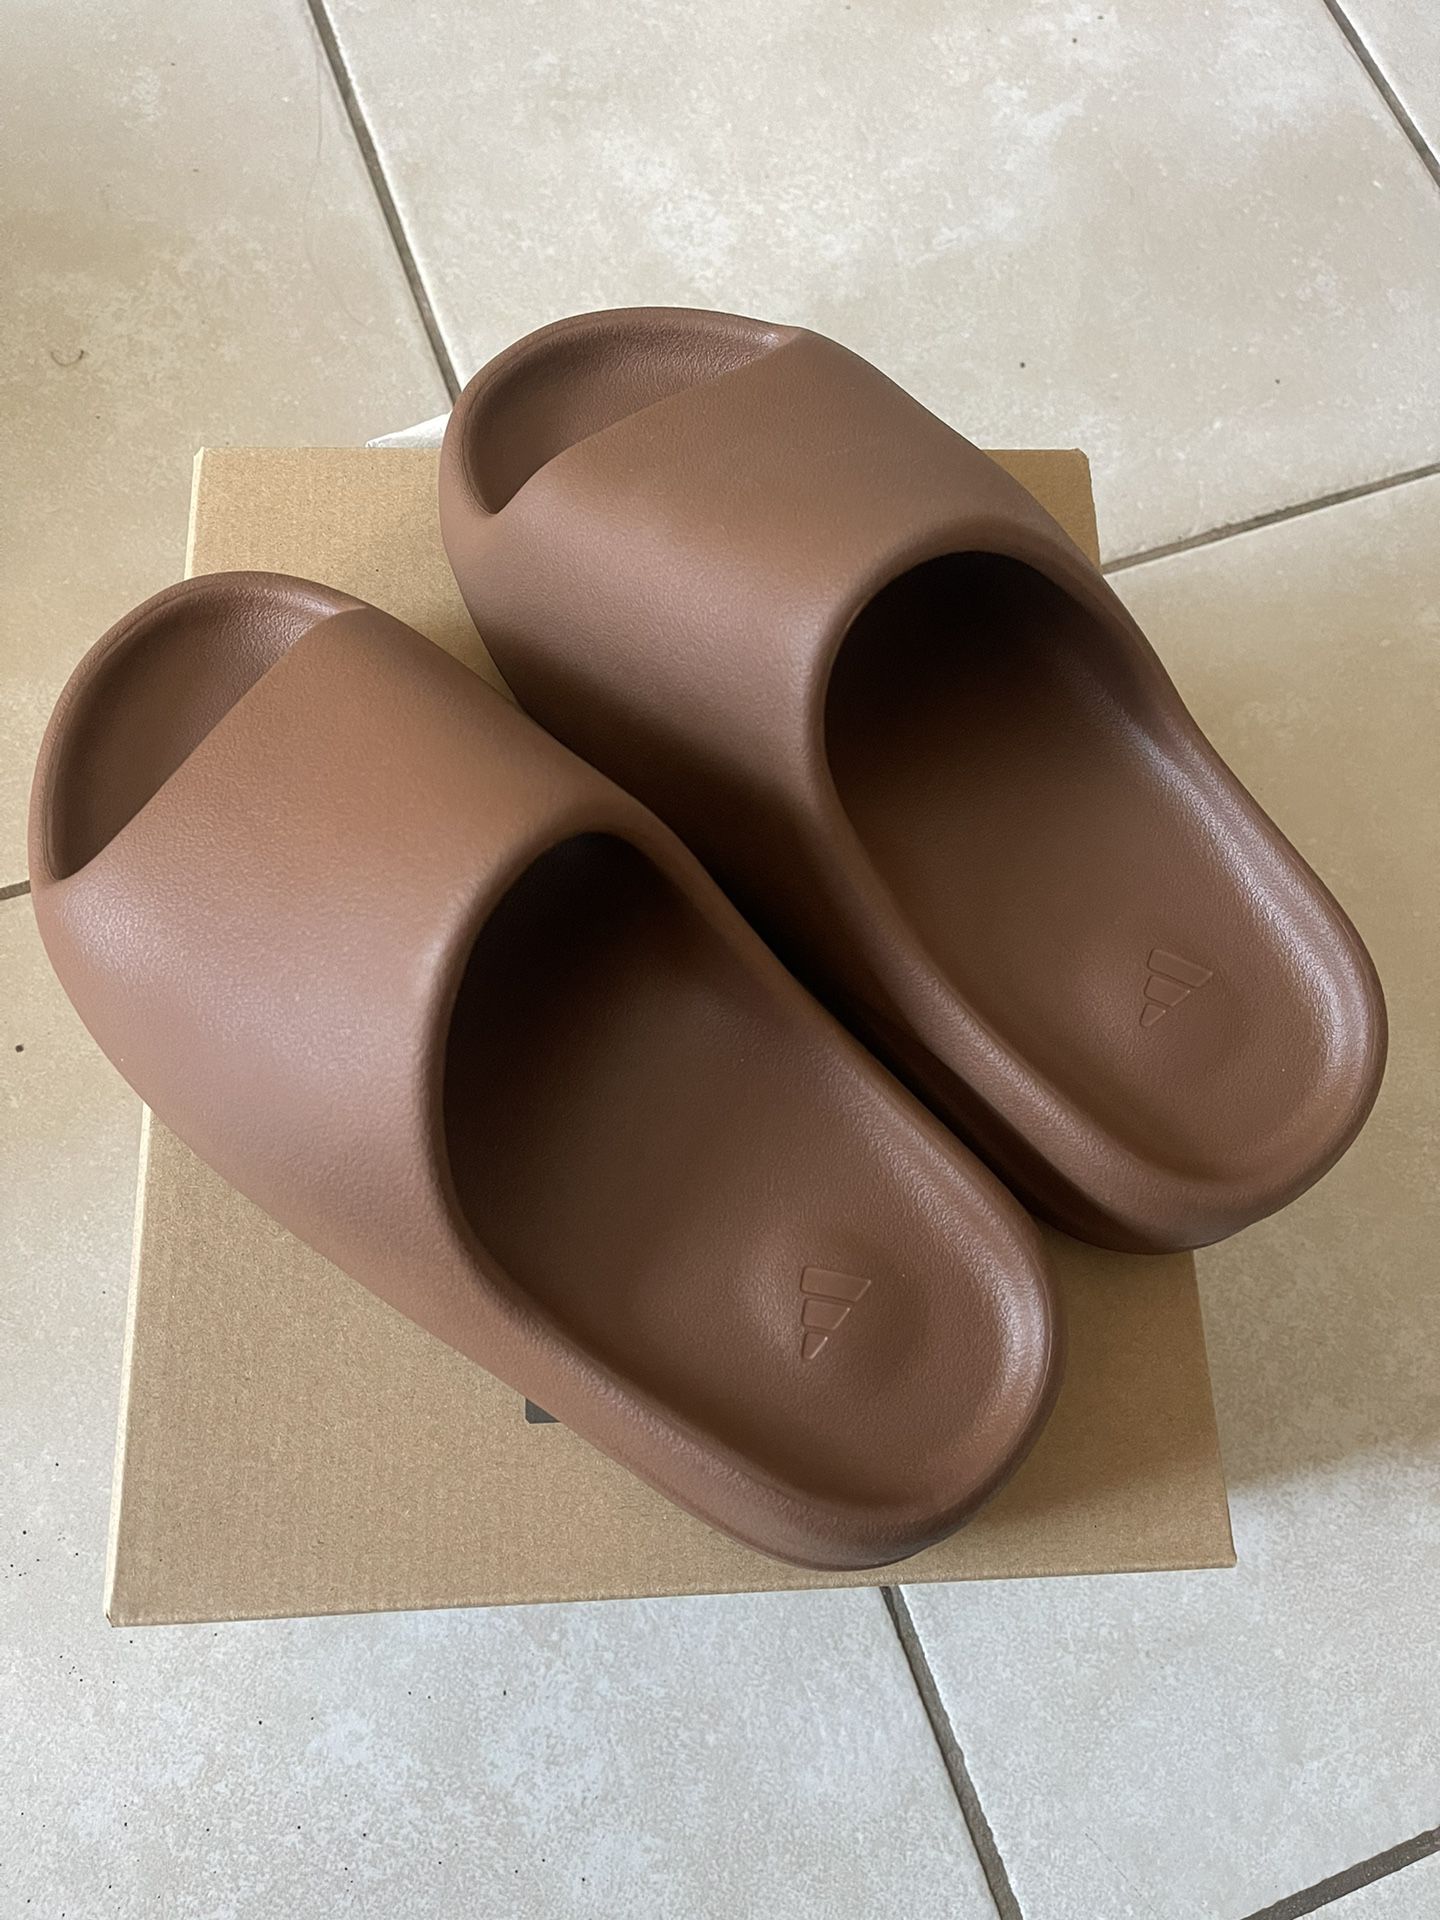 yeezy slides color FLAX size 6 mens BRAND NEW